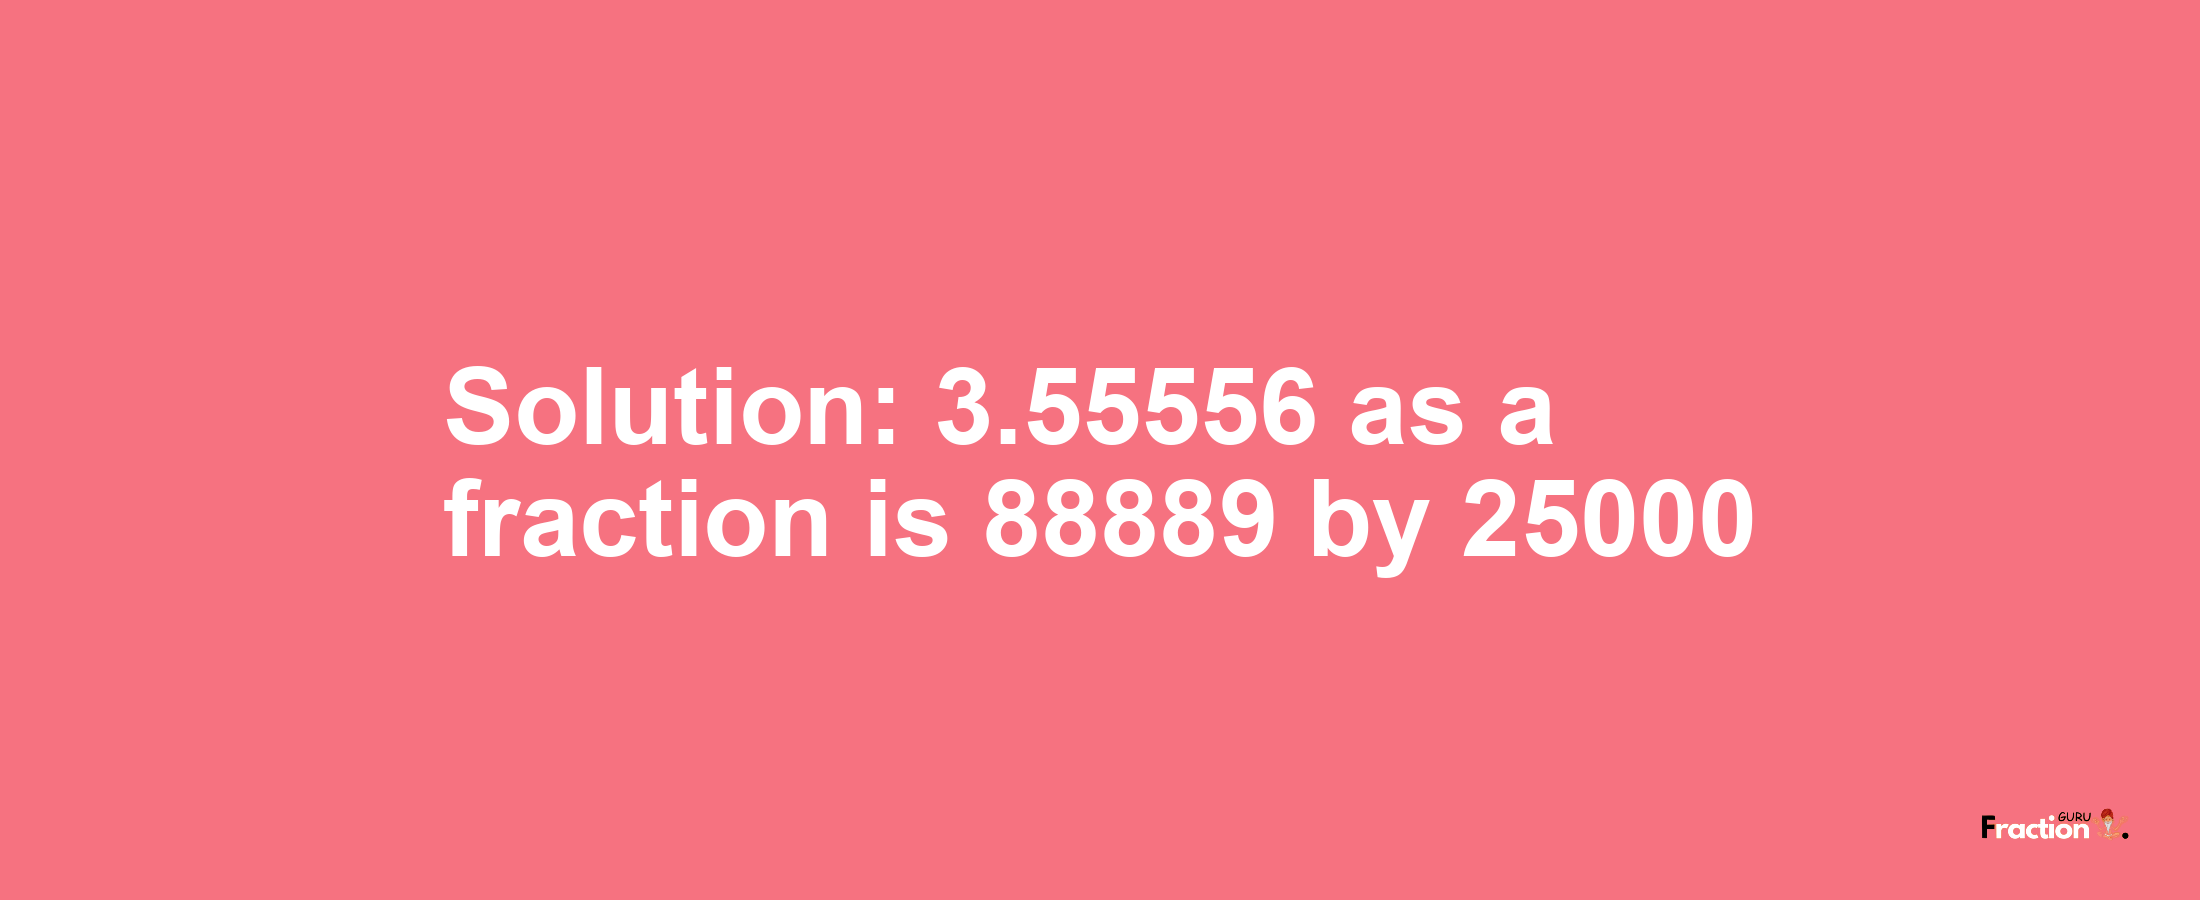 Solution:3.55556 as a fraction is 88889/25000